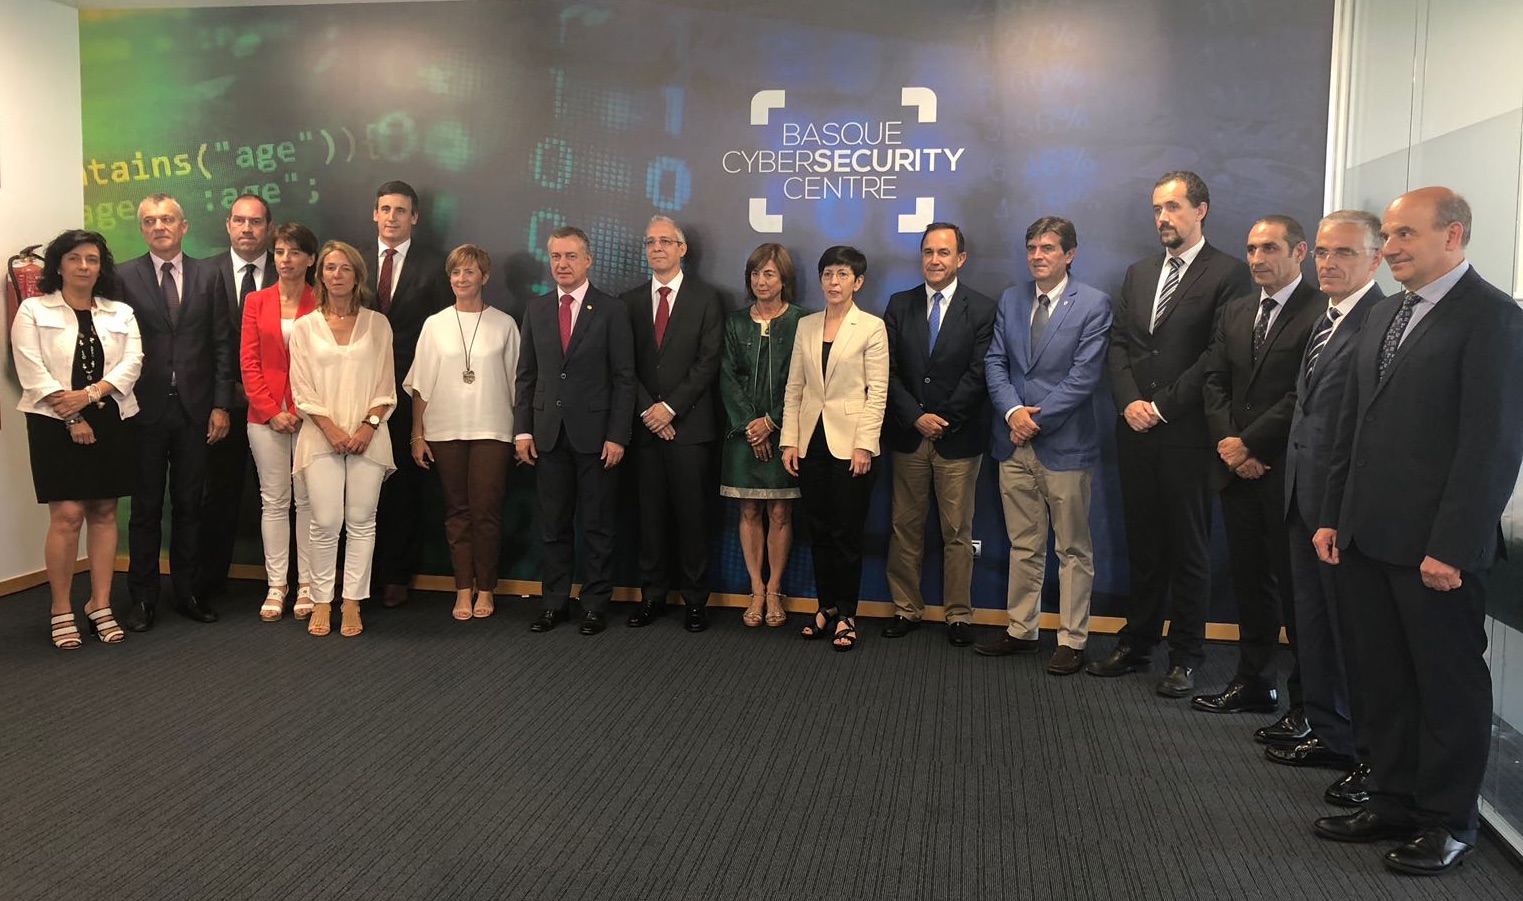 Basque Cybersecurity Centre inaugurates its installations